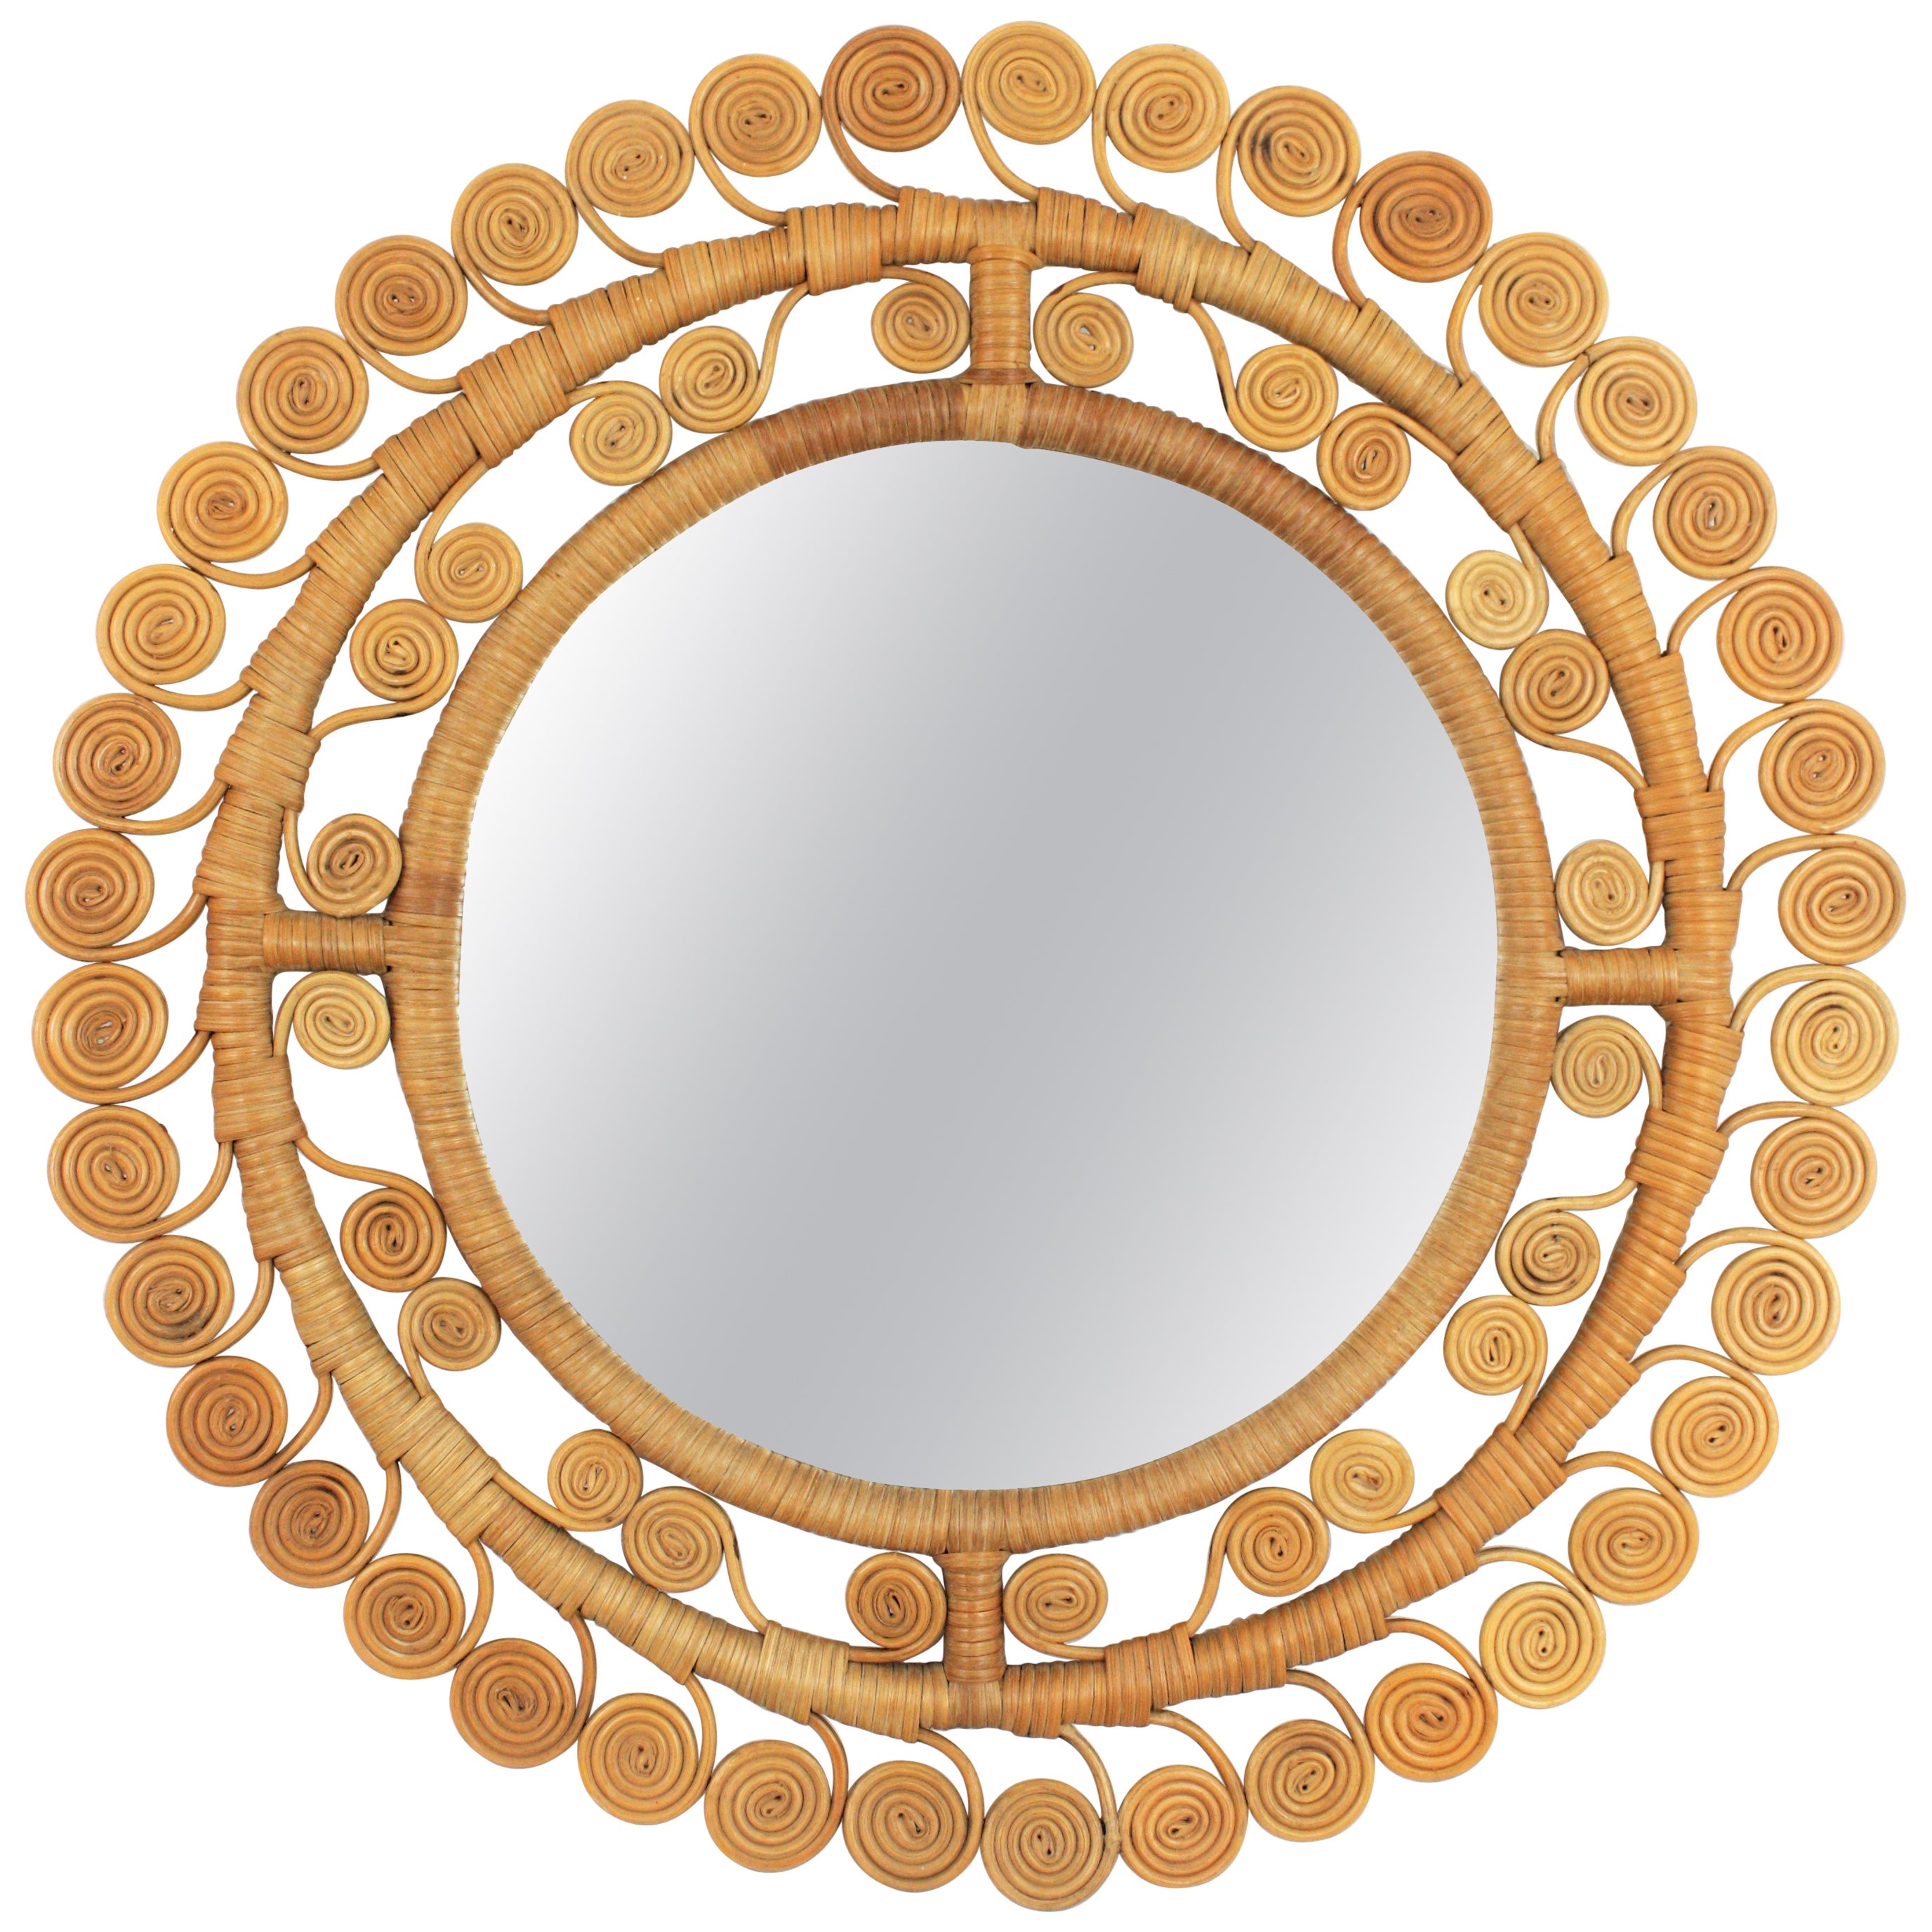 Rattan Round Mirror with Filigree Scrollwork Frame, Spain, 1960s